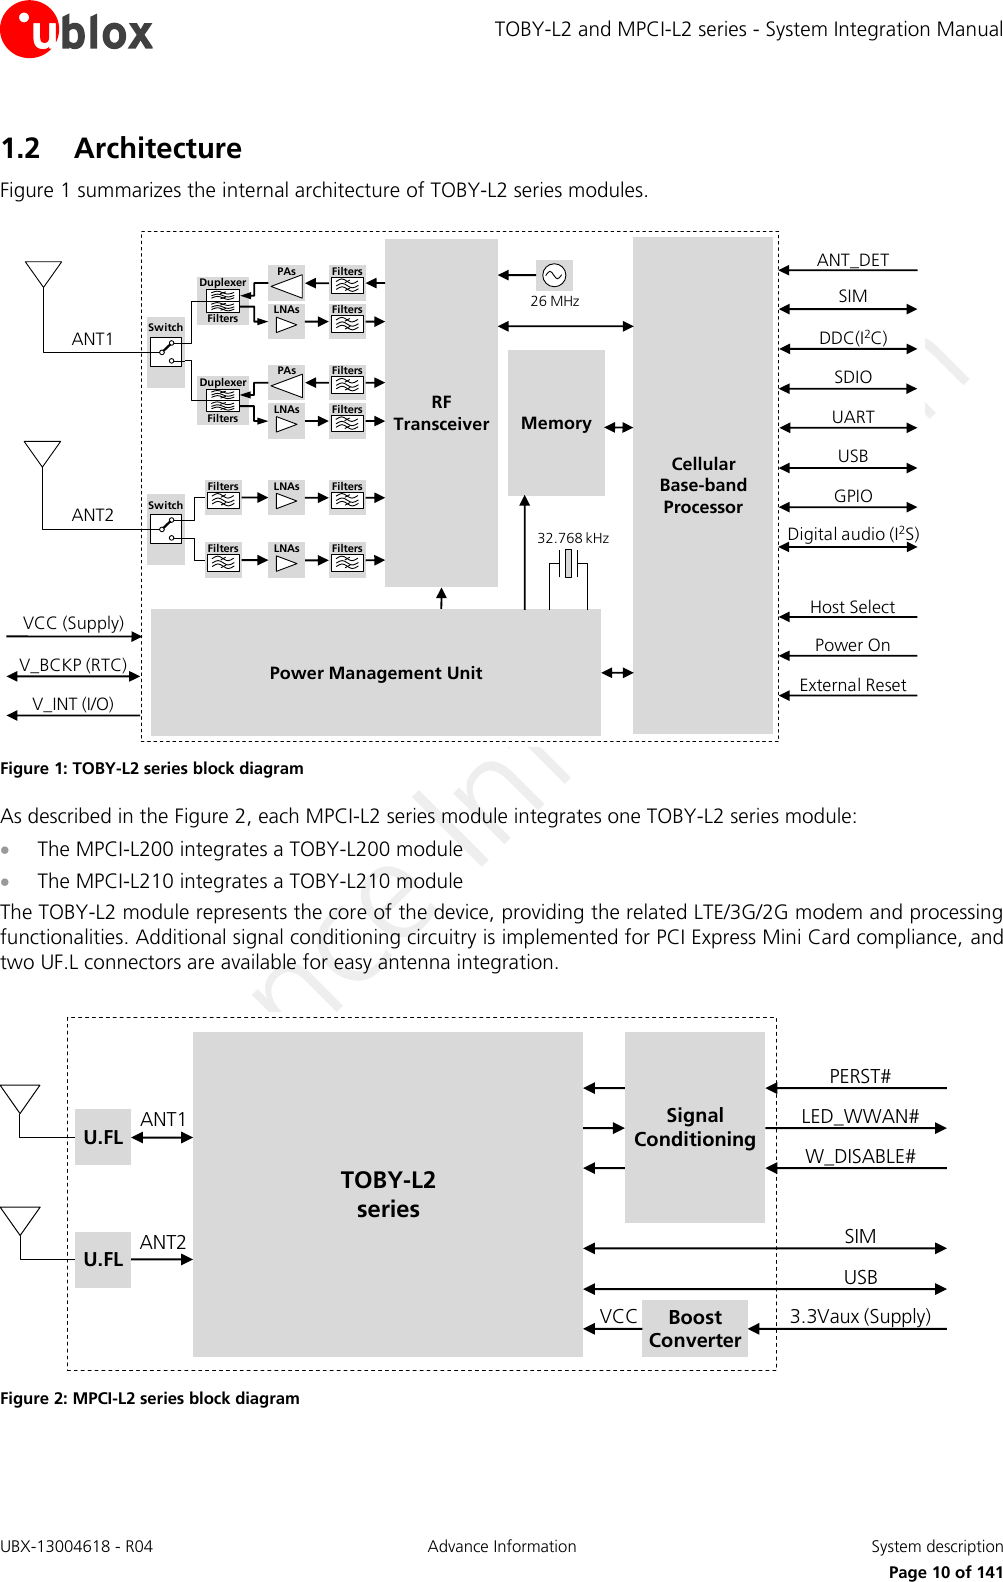 TOBY-L2 and MPCI-L2 series - System Integration Manual UBX-13004618 - R04  Advance Information  System description     Page 10 of 141 1.2 Architecture Figure 1 summarizes the internal architecture of TOBY-L2 series modules. CellularBase-bandProcessorMemoryPower Management Unit26 MHz32.768 kHzANT1RF TransceiverANT2V_INT (I/O)V_BCKP (RTC)VCC (Supply)SIMUSBGPIOPower OnExternal ResetPAsLNAs FiltersFiltersDuplexerFiltersPAsLNAs FiltersFiltersDuplexerFiltersLNAs FiltersFiltersLNAs FiltersFiltersSwitchSwitchDDC(I2C)SDIOUARTDigital audio (I2S)ANT_DETHost Select Figure 1: TOBY-L2 series block diagram As described in the Figure 2, each MPCI-L2 series module integrates one TOBY-L2 series module:  The MPCI-L200 integrates a TOBY-L200 module  The MPCI-L210 integrates a TOBY-L210 module The TOBY-L2 module represents the core of the device, providing the related LTE/3G/2G modem and processing functionalities. Additional signal conditioning circuitry is implemented for PCI Express Mini Card compliance, and two UF.L connectors are available for easy antenna integration.  ANT1SIMUSBW_DISABLE#TOBY-L2seriesSignal ConditioningANT2PERST#LED_WWAN#U.FLU.FL3.3Vaux (Supply)Boost ConverterVCC Figure 2: MPCI-L2 series block diagram  